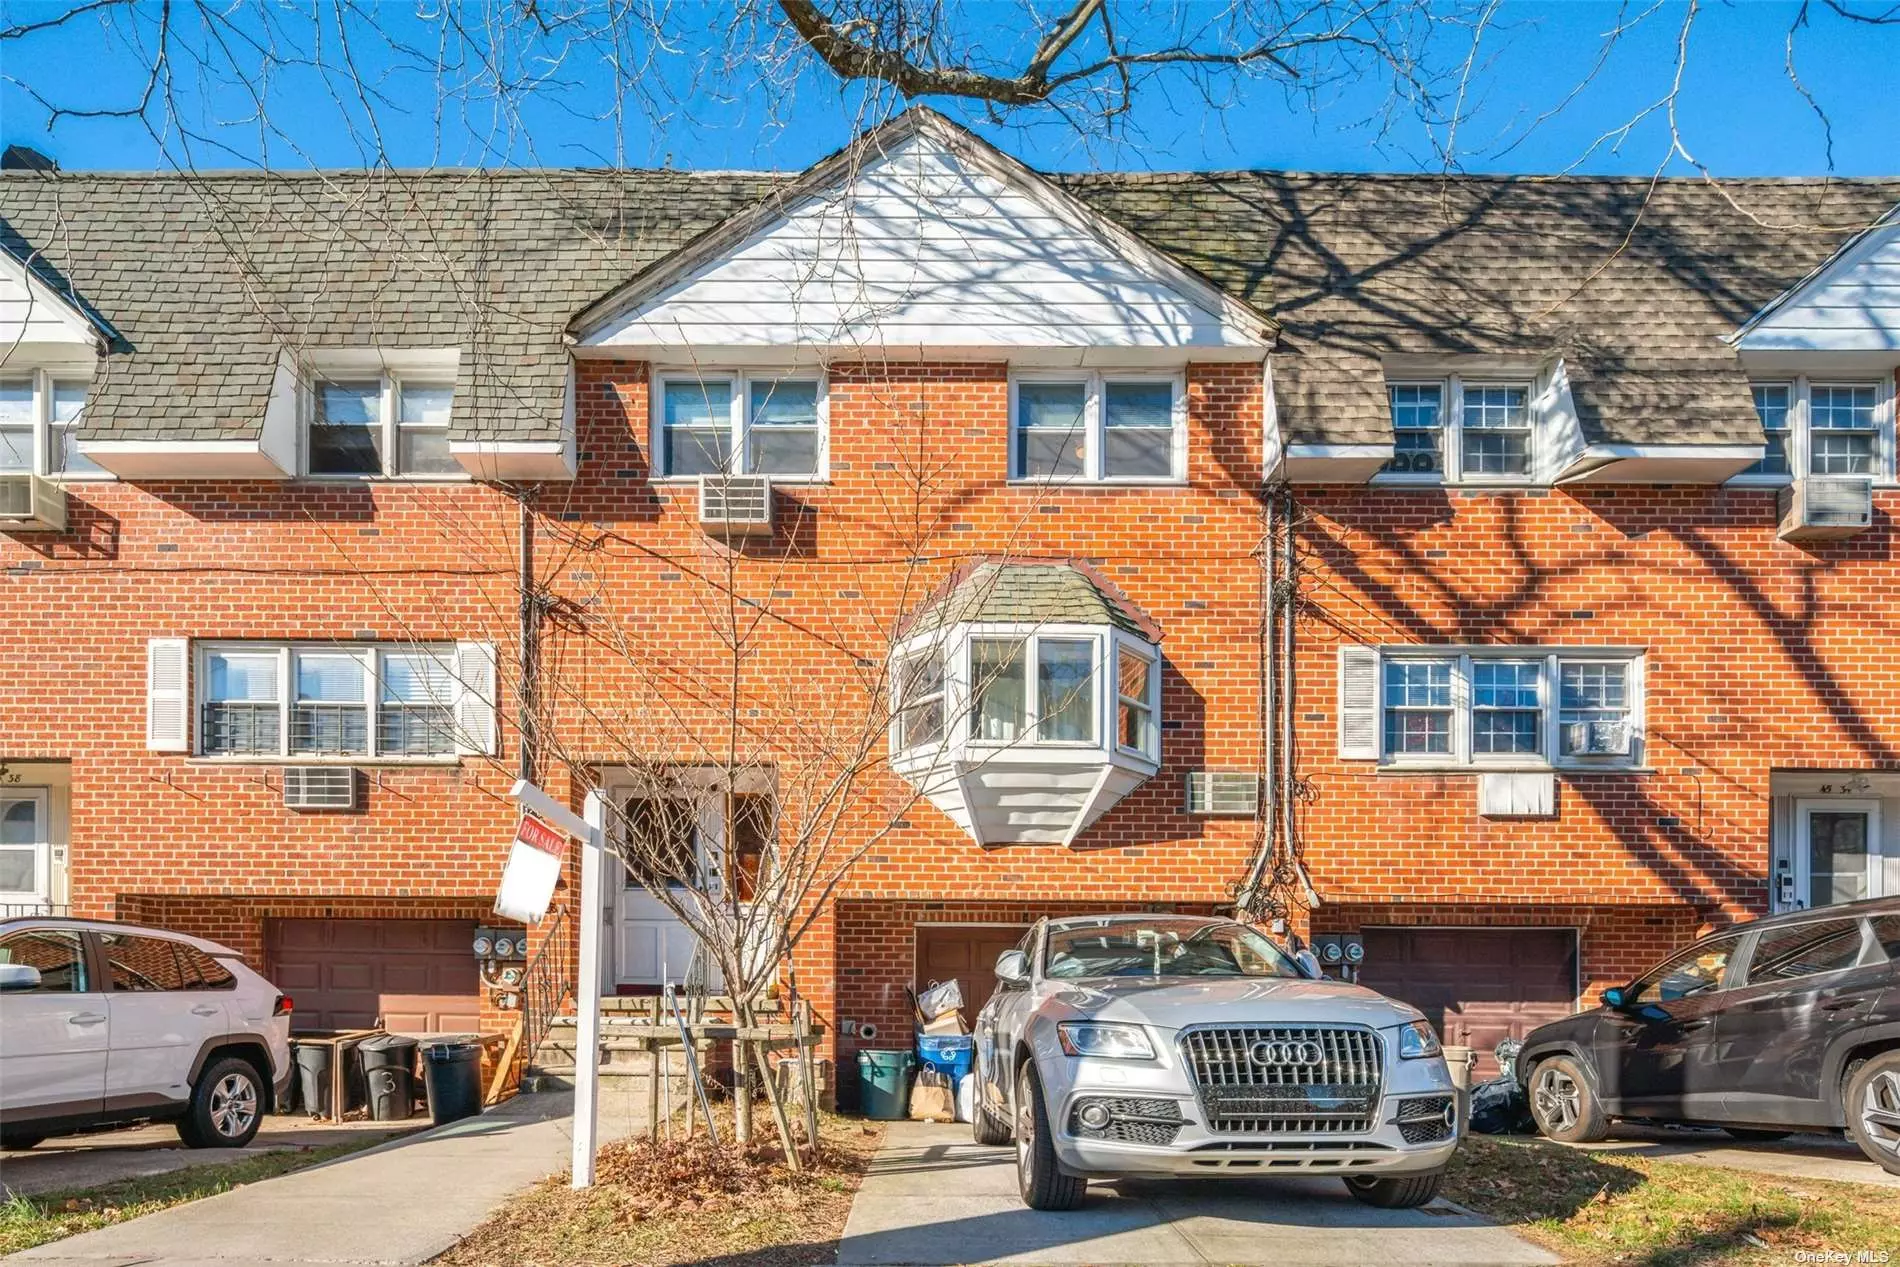 This is an amazing opportunity to own this Rare 4 family Brick House in center of Bayside. Half block to Northern Blvd. Near Park, Oakland Lake. Close to all, Bus Q12 To Flushing & Long Island. Close to LIRR. 10 Minutes Drive To Bay Terrace Mall. School District Queens 26. (Ps.203, Bayside H.S), near QCC Convenient To All. Newer Furnace and Hot Water Heater. Perfect For Owner occupied & Investment. Cap rate approx. 5%, price to sell won&rsquo;t last!